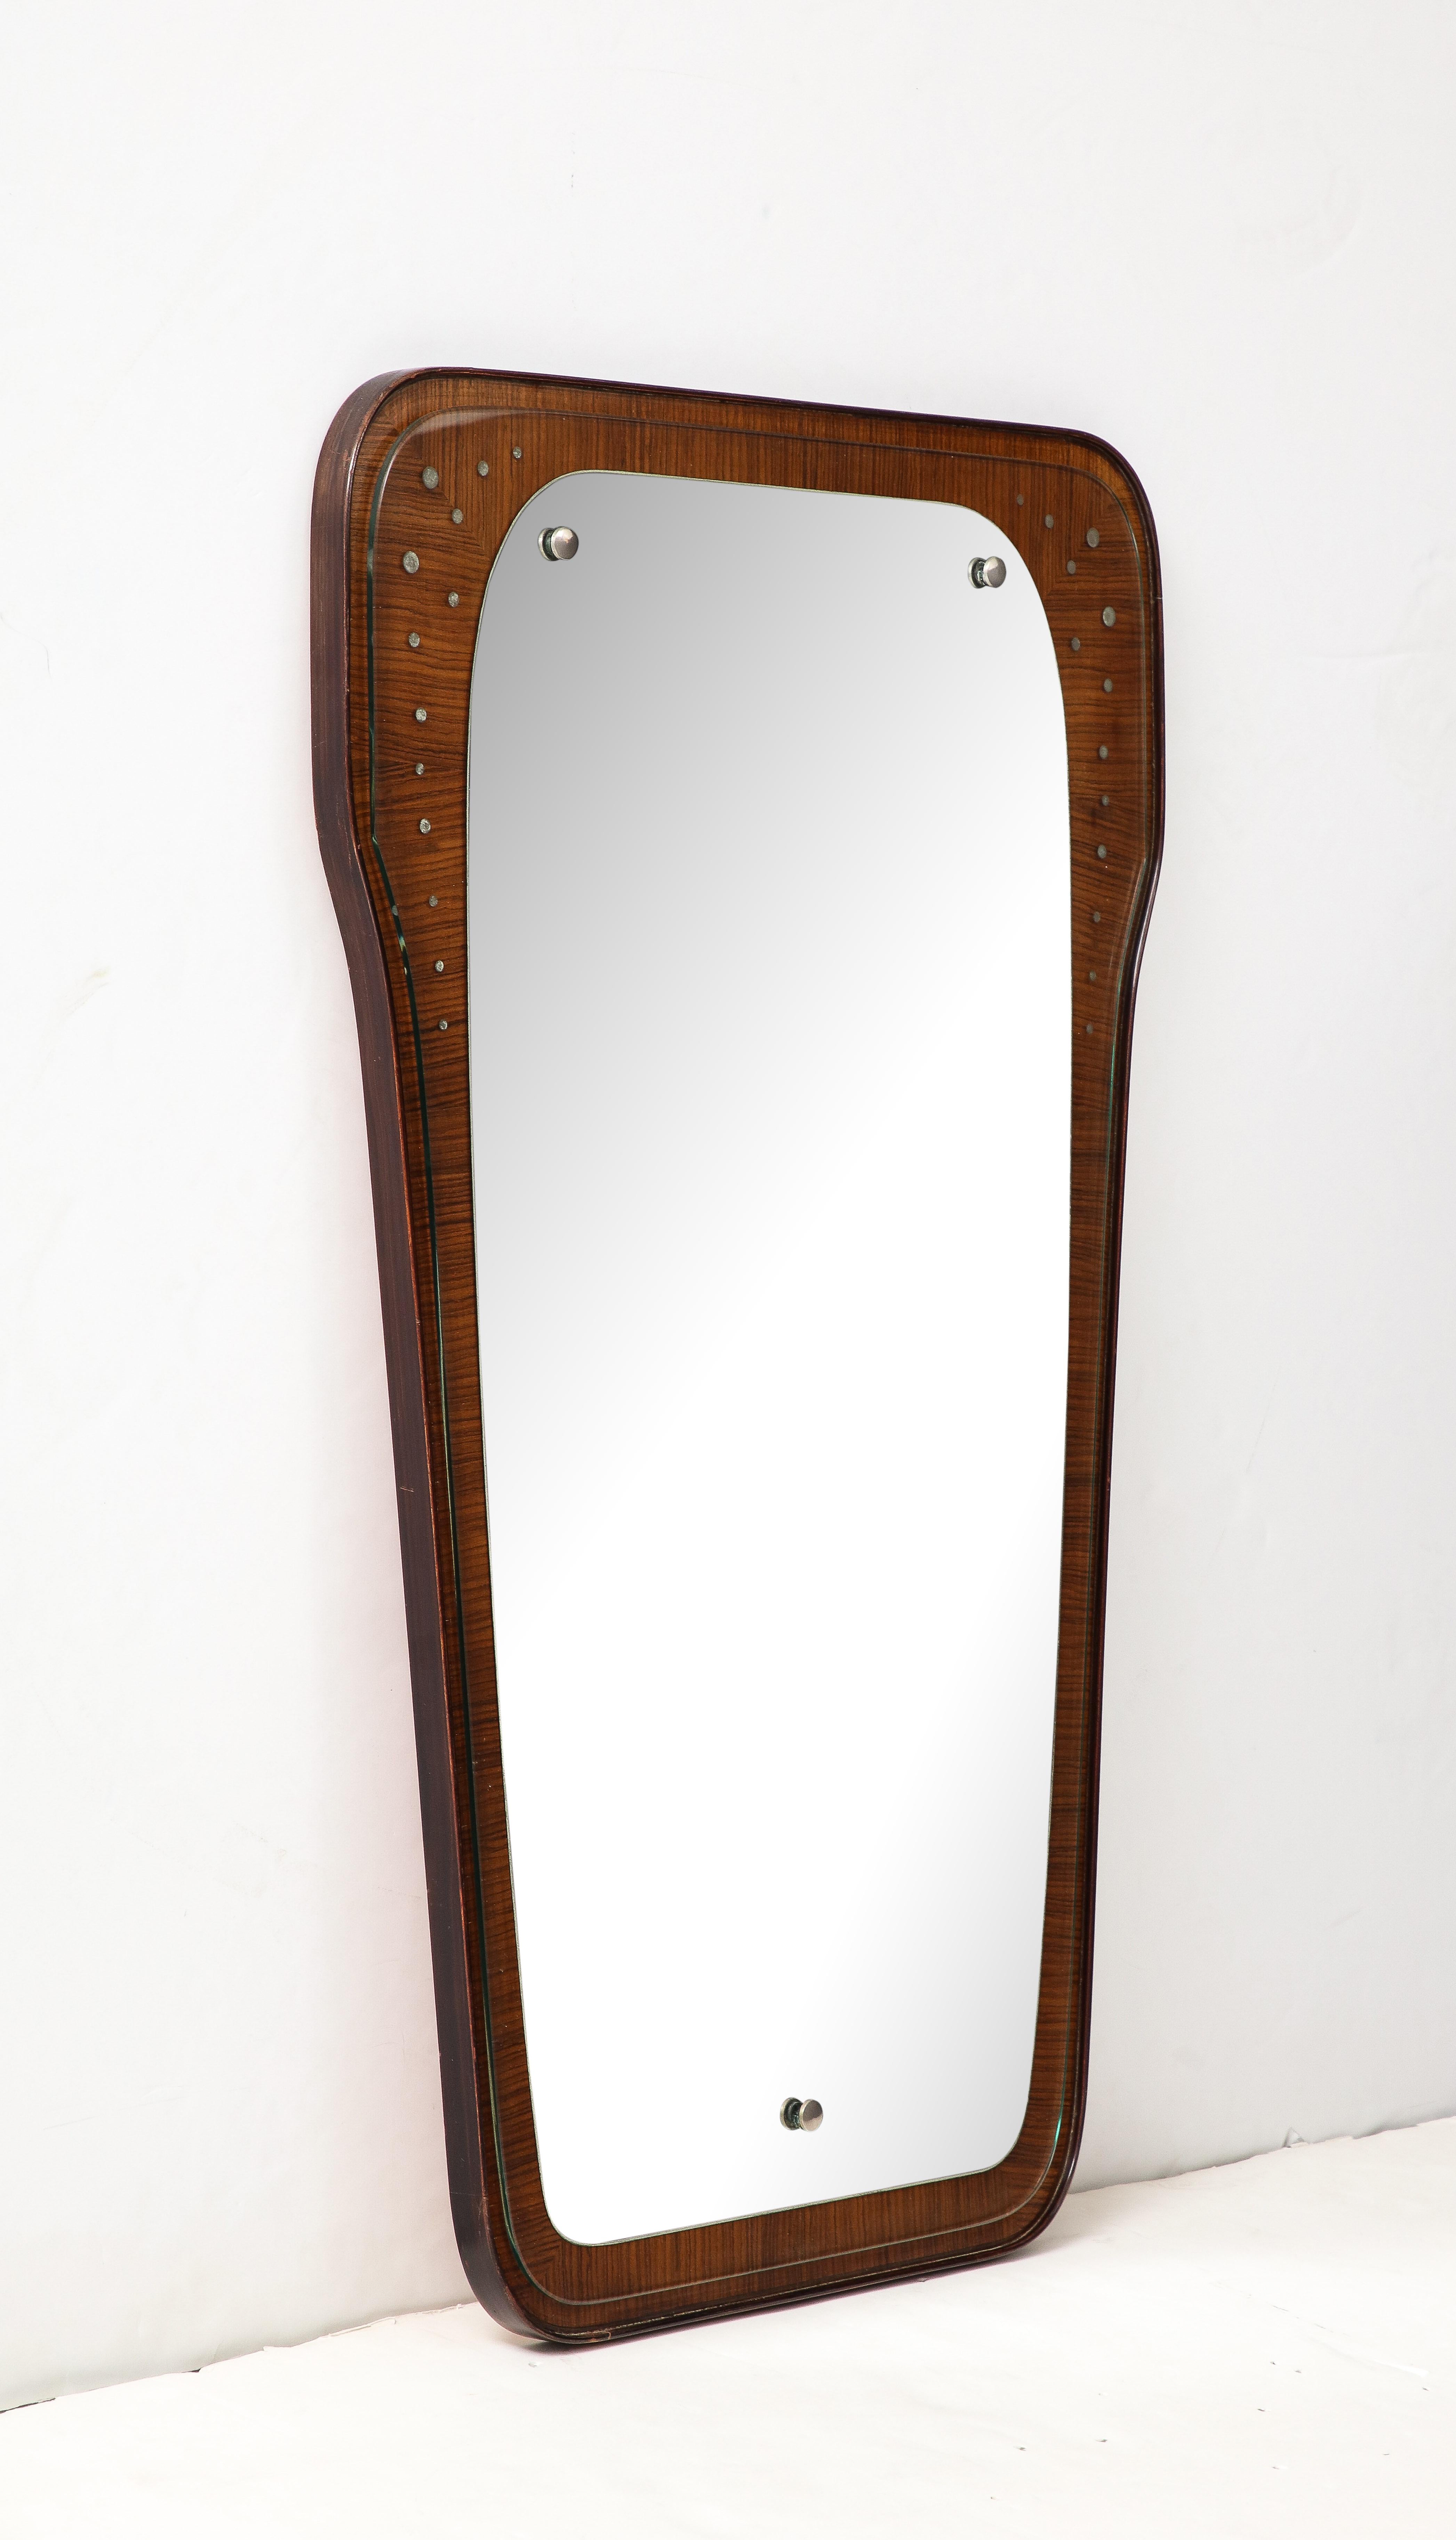 Mahogany Wall Mirror with Inlaid Metal, Italy, c. 1960 In Excellent Condition For Sale In New York City, NY